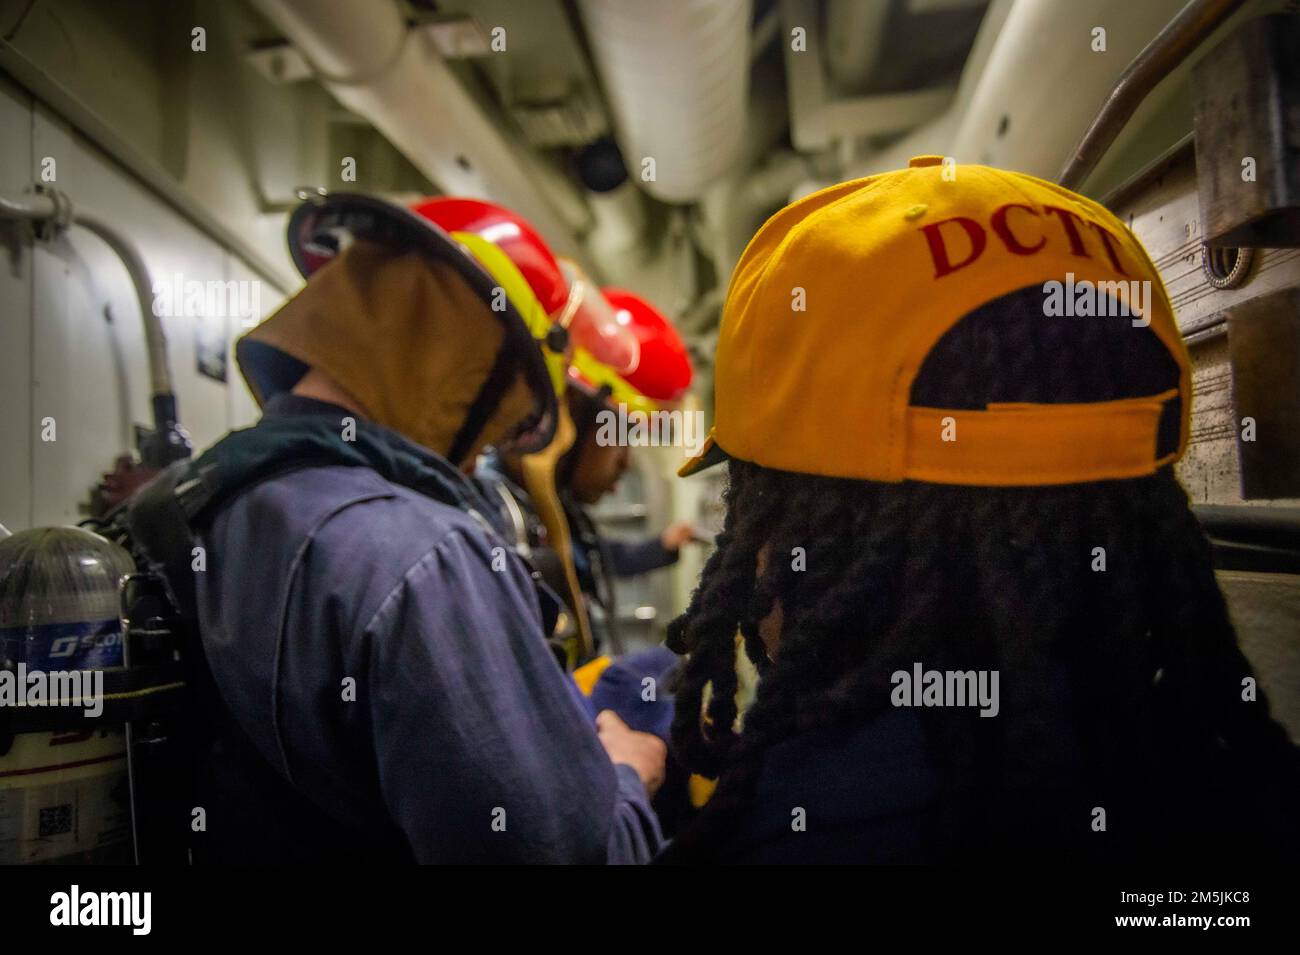 220319-N-FS190-2025 ATLANTIC OCEAN (March 19, 2022) Retail Specialist 1st Class Keonna Wilcox, assigned to the Arleigh Burke-class guided-missile destroyer USS Truxtun (DDG 103), directs Sailors as a damage control training team (DCTT) member during a damage control drill for Task Force Exercise (TFEX), March 19, 2022. TFEX is a scenario driven exercise that serves as certification for independent deploying ships and is designated to test mission readiness and performance in integrated operations. Truxtun is underway for Carrier Strike Group (CSG) 4 training evolutions. Stock Photo